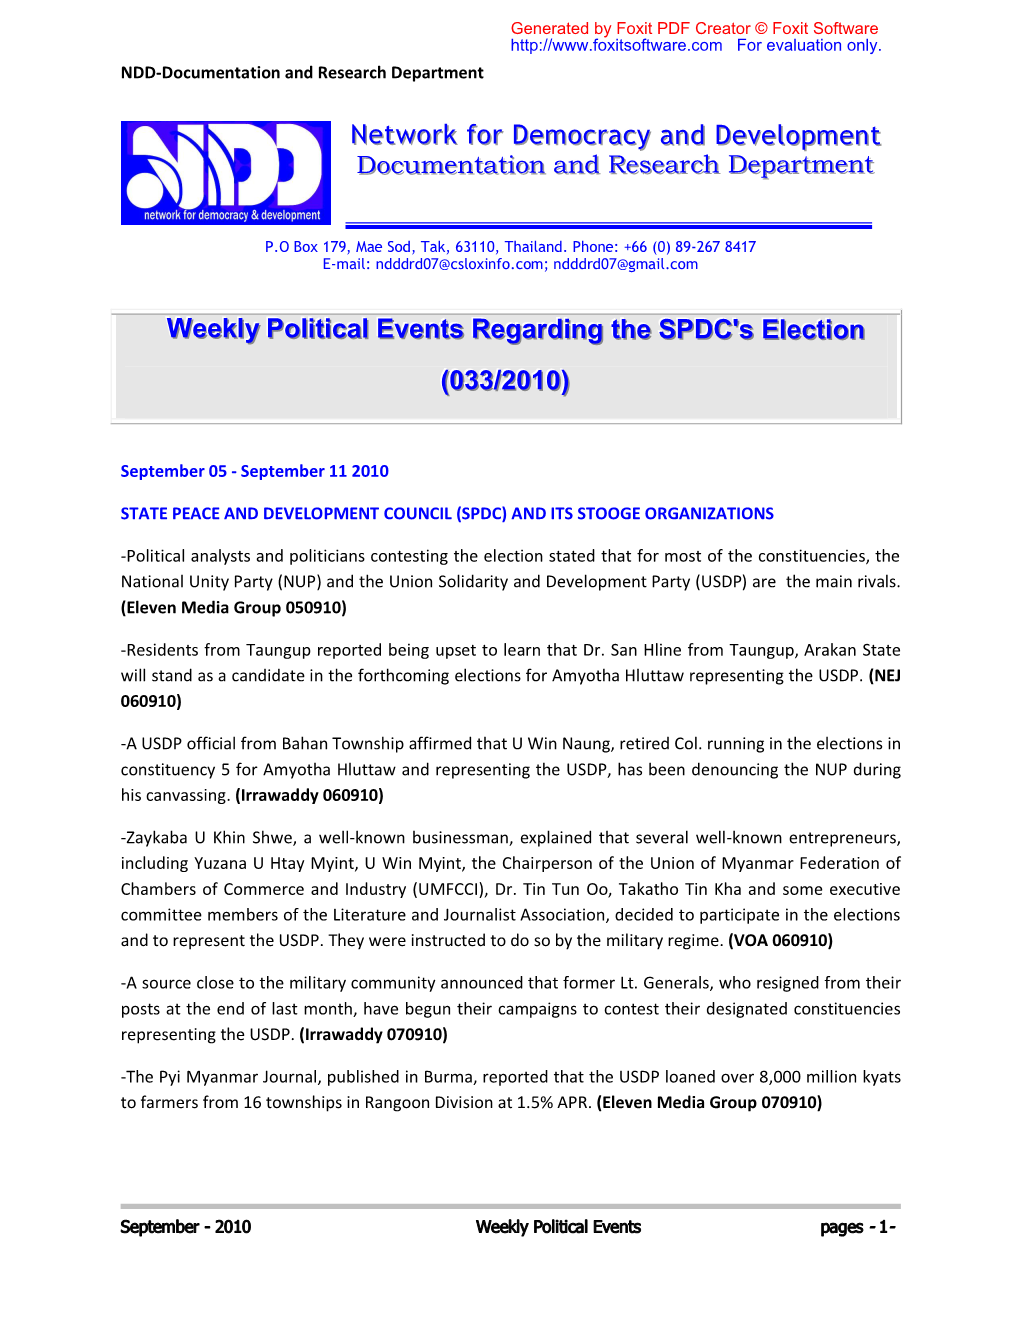 Network for Democracy and Development Weekly Political Events